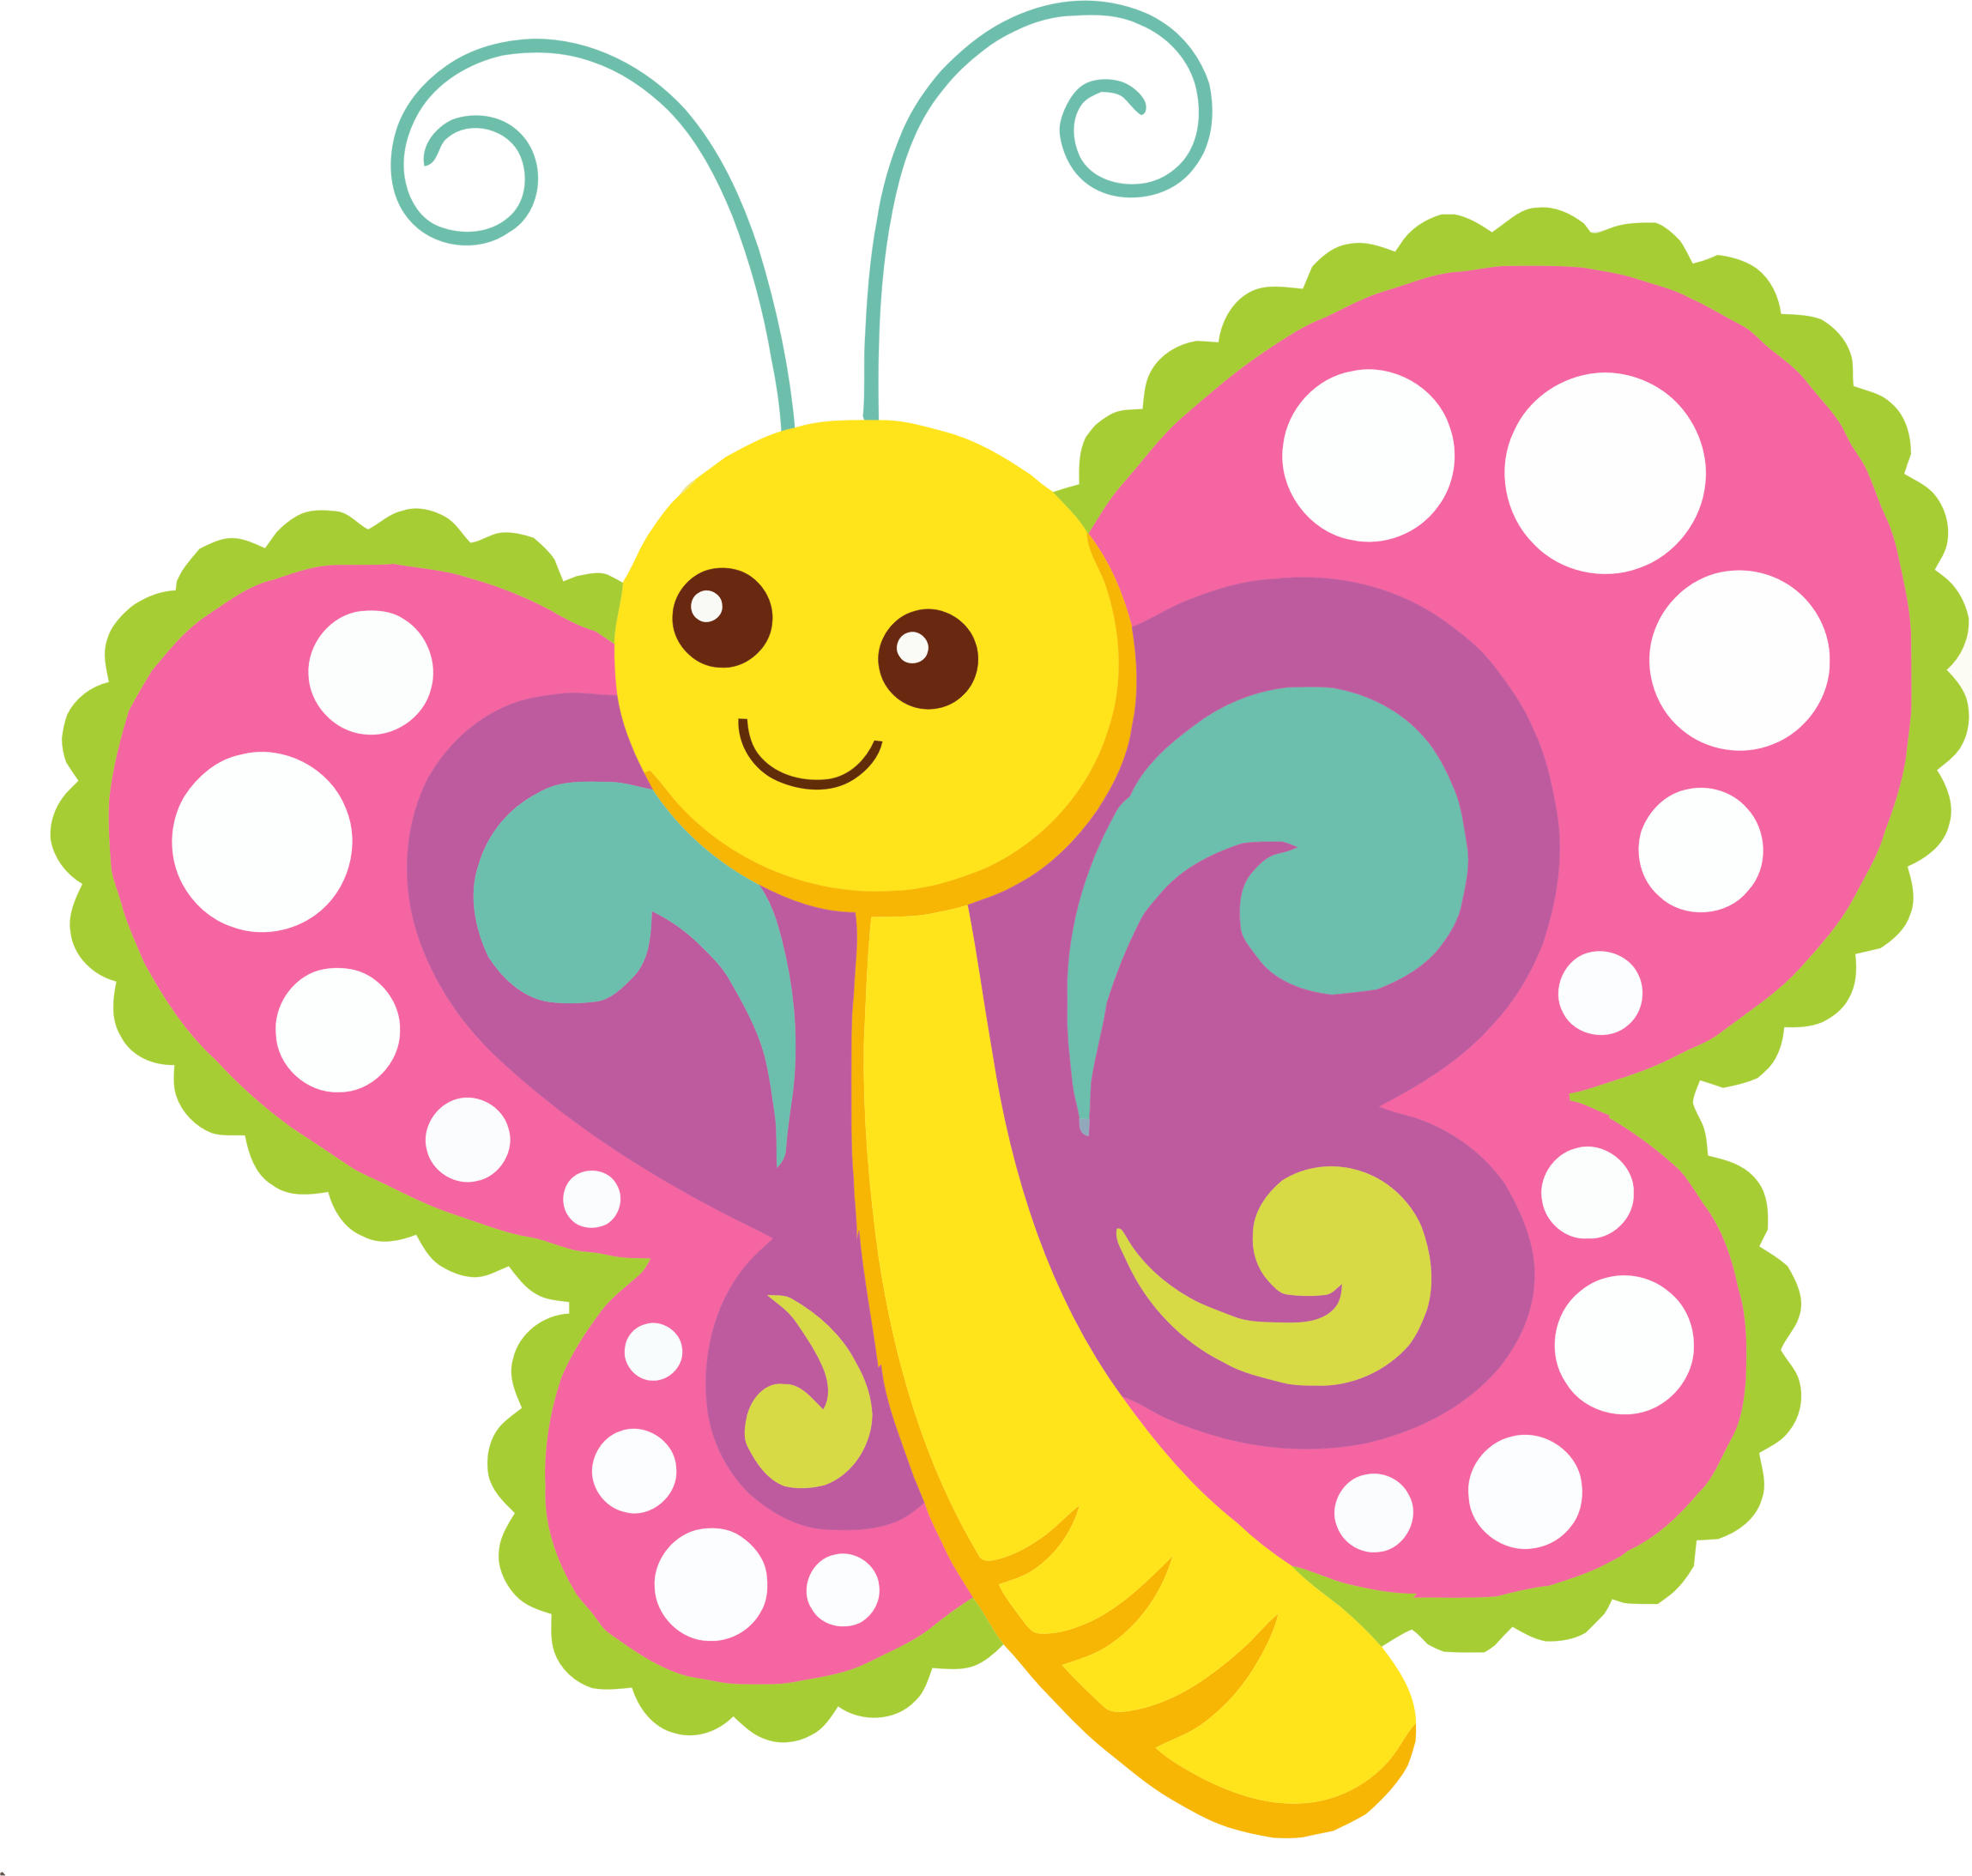 Cute butterfly clipart png - ClipartFox